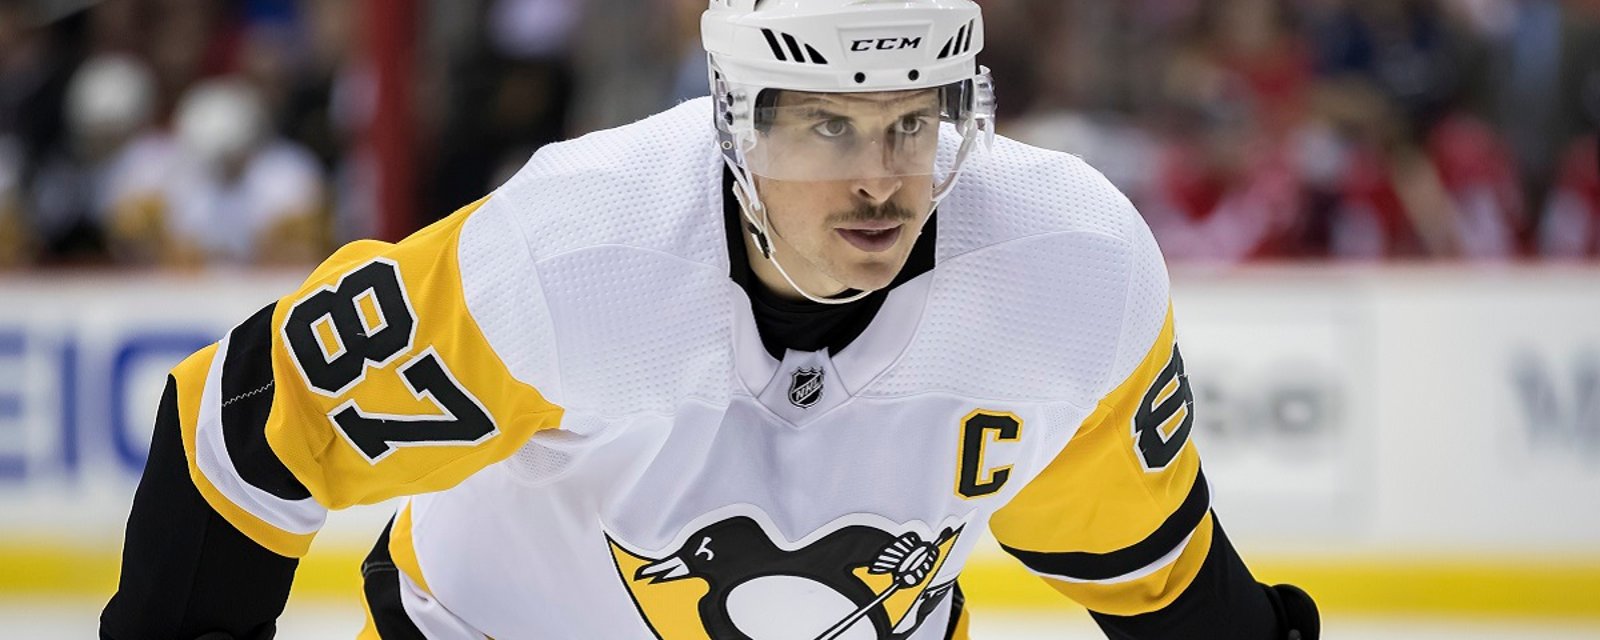 Crosby's former coach share details on one of his infamous stunts.